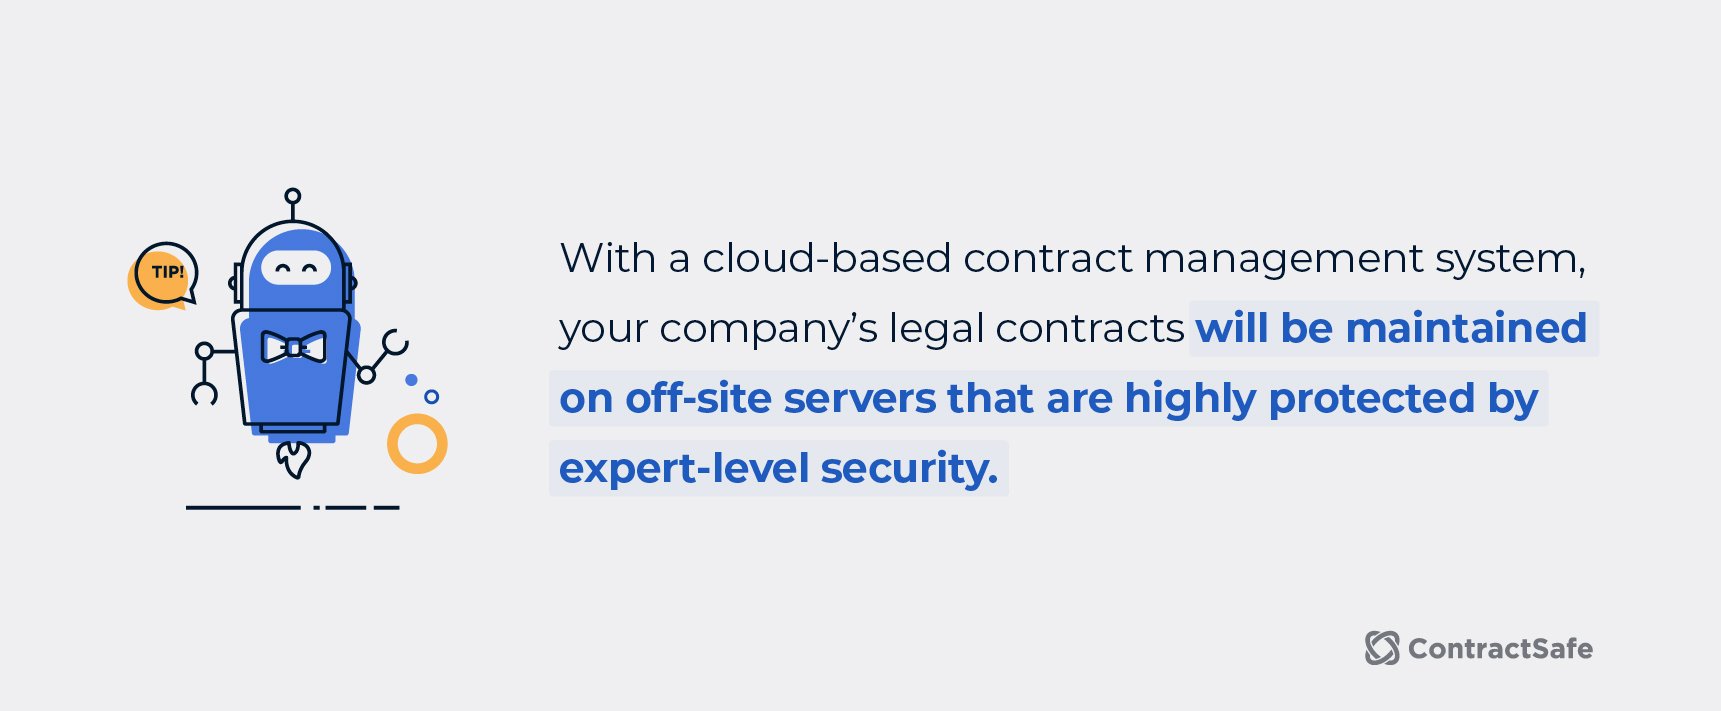 With a cloud-based contract management system, your company's legal contracts will be maintained on off-site servers that are highly protected by expert-level security. 